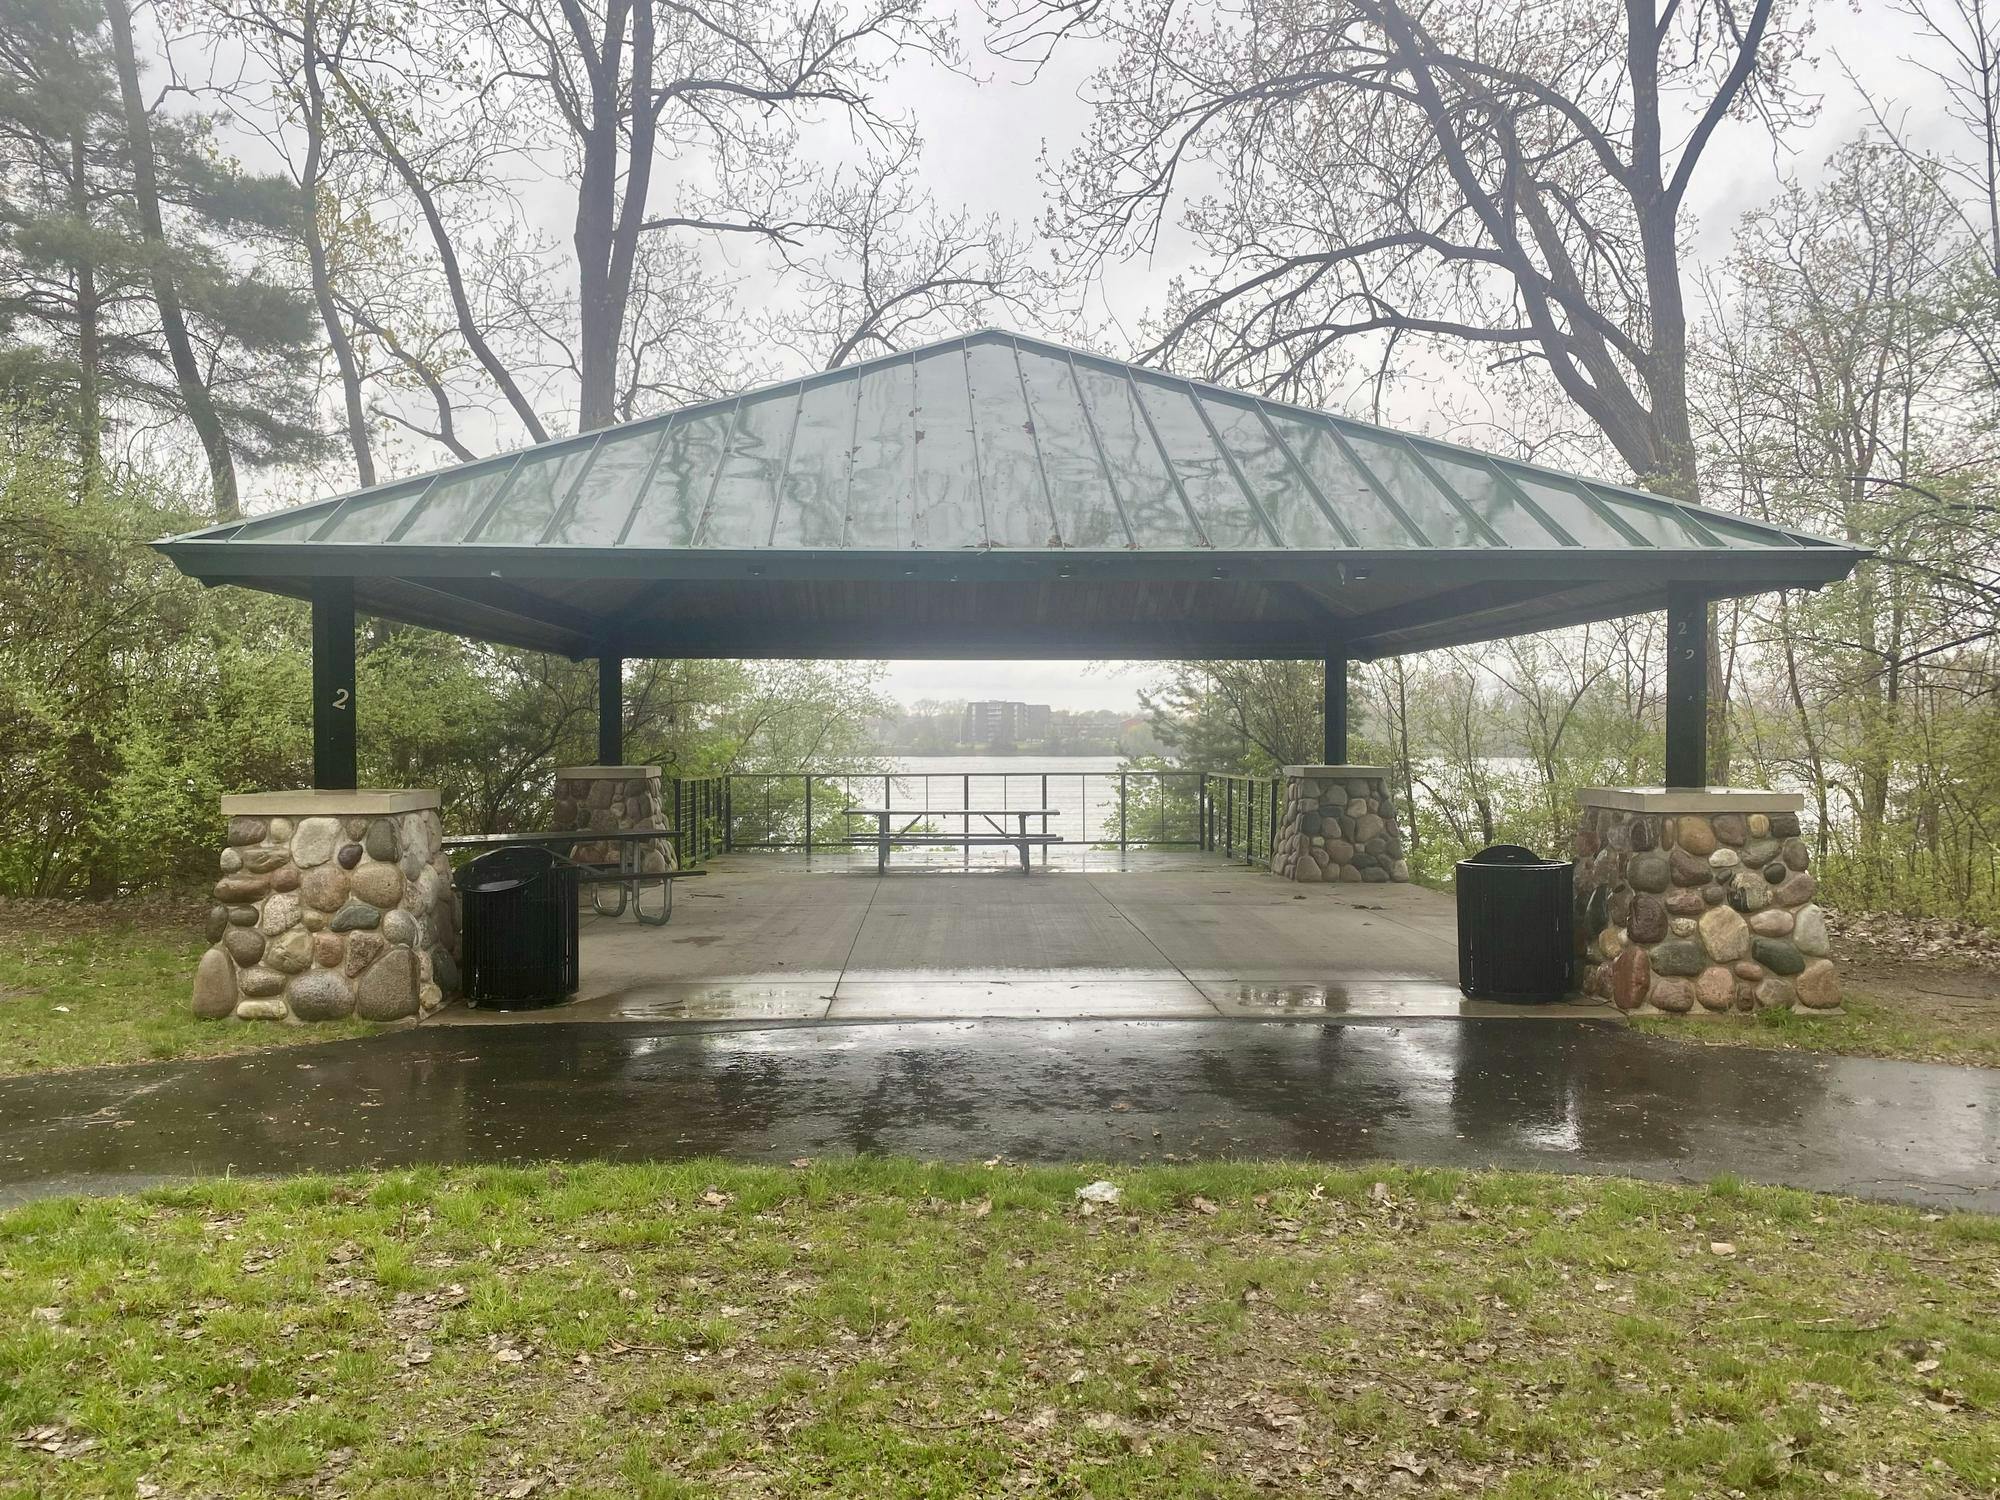 The pavilion at Lakeside Park overlooks Ford Lake, which features the home course for Eastern Michigan University's rowing team. The university and community are celebrating the installation of a new 2,000-meter rowing course on the lake that includes eight competition lanes. 